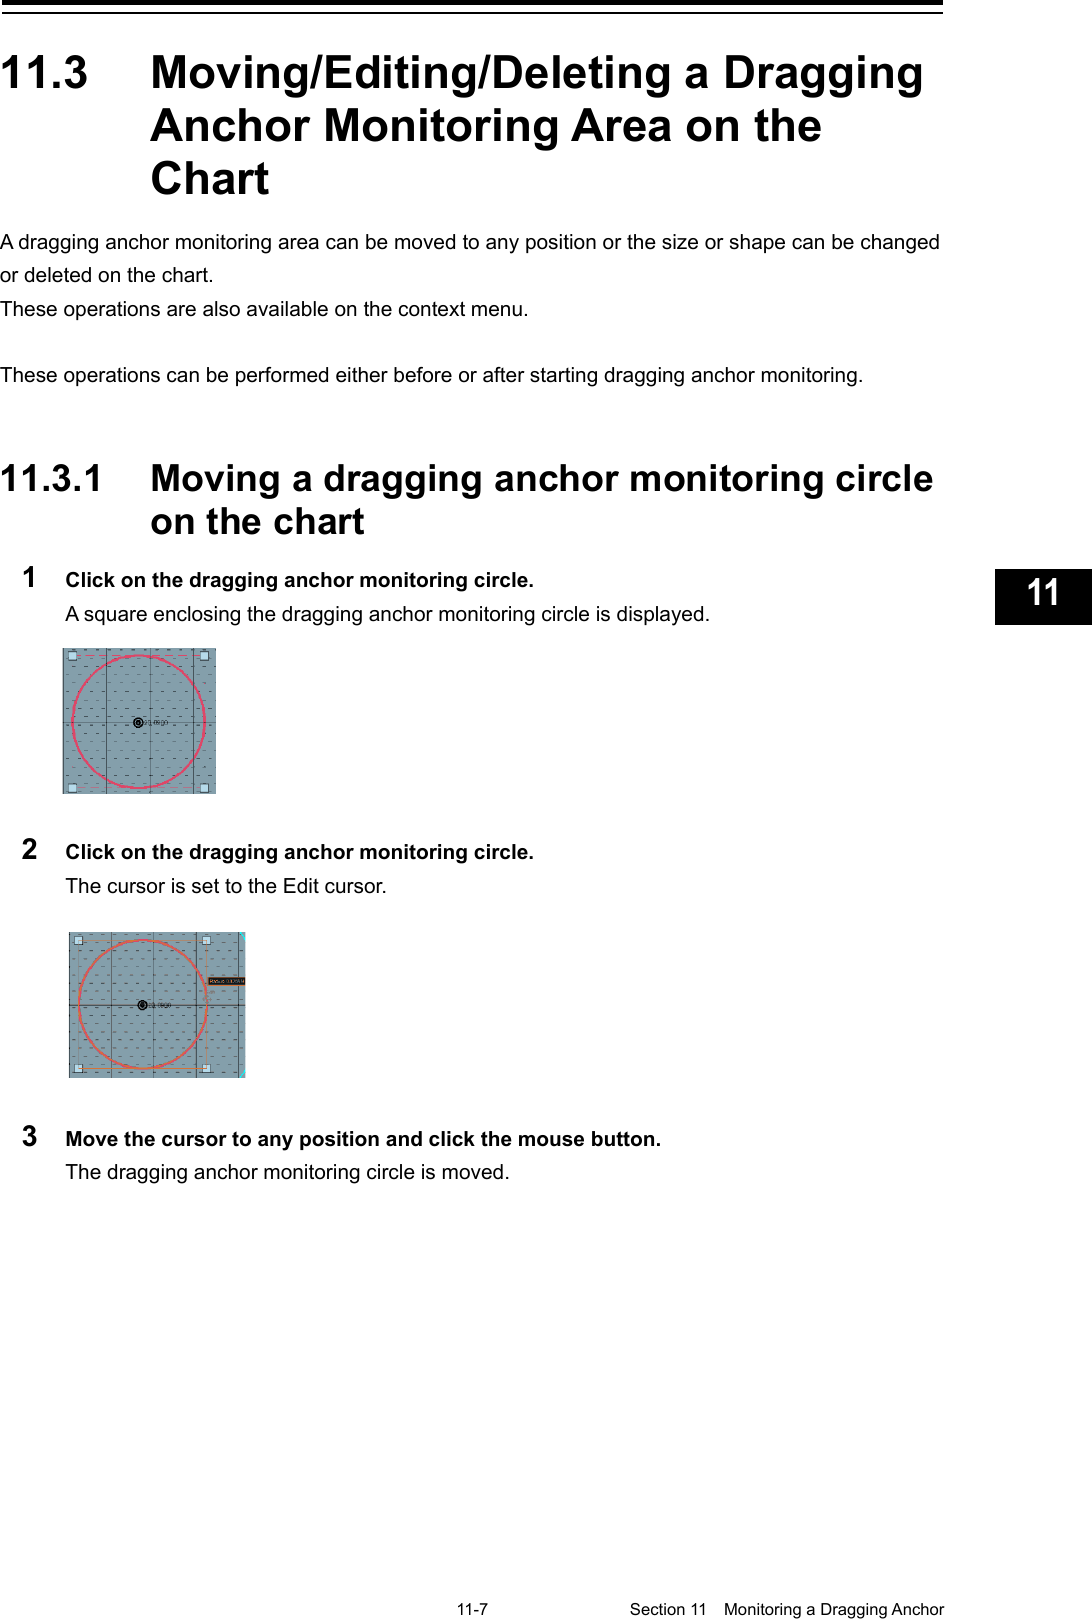   11-7  Section 11  Monitoring a Dragging Anchor    1  2  3  4  5  6  7  8  9  10  11  12  13  14  15  16  17  18  19  20  21  22  23  24  25  26  27  付録    11.3  Moving/Editing/Deleting a Dragging Anchor Monitoring Area on the Chart A dragging anchor monitoring area can be moved to any position or the size or shape can be changed or deleted on the chart. These operations are also available on the context menu.  These operations can be performed either before or after starting dragging anchor monitoring.   11.3.1 Moving a dragging anchor monitoring circle on the chart 1  Click on the dragging anchor monitoring circle. A square enclosing the dragging anchor monitoring circle is displayed.  2  Click on the dragging anchor monitoring circle. The cursor is set to the Edit cursor.   3  Move the cursor to any position and click the mouse button. The dragging anchor monitoring circle is moved.    